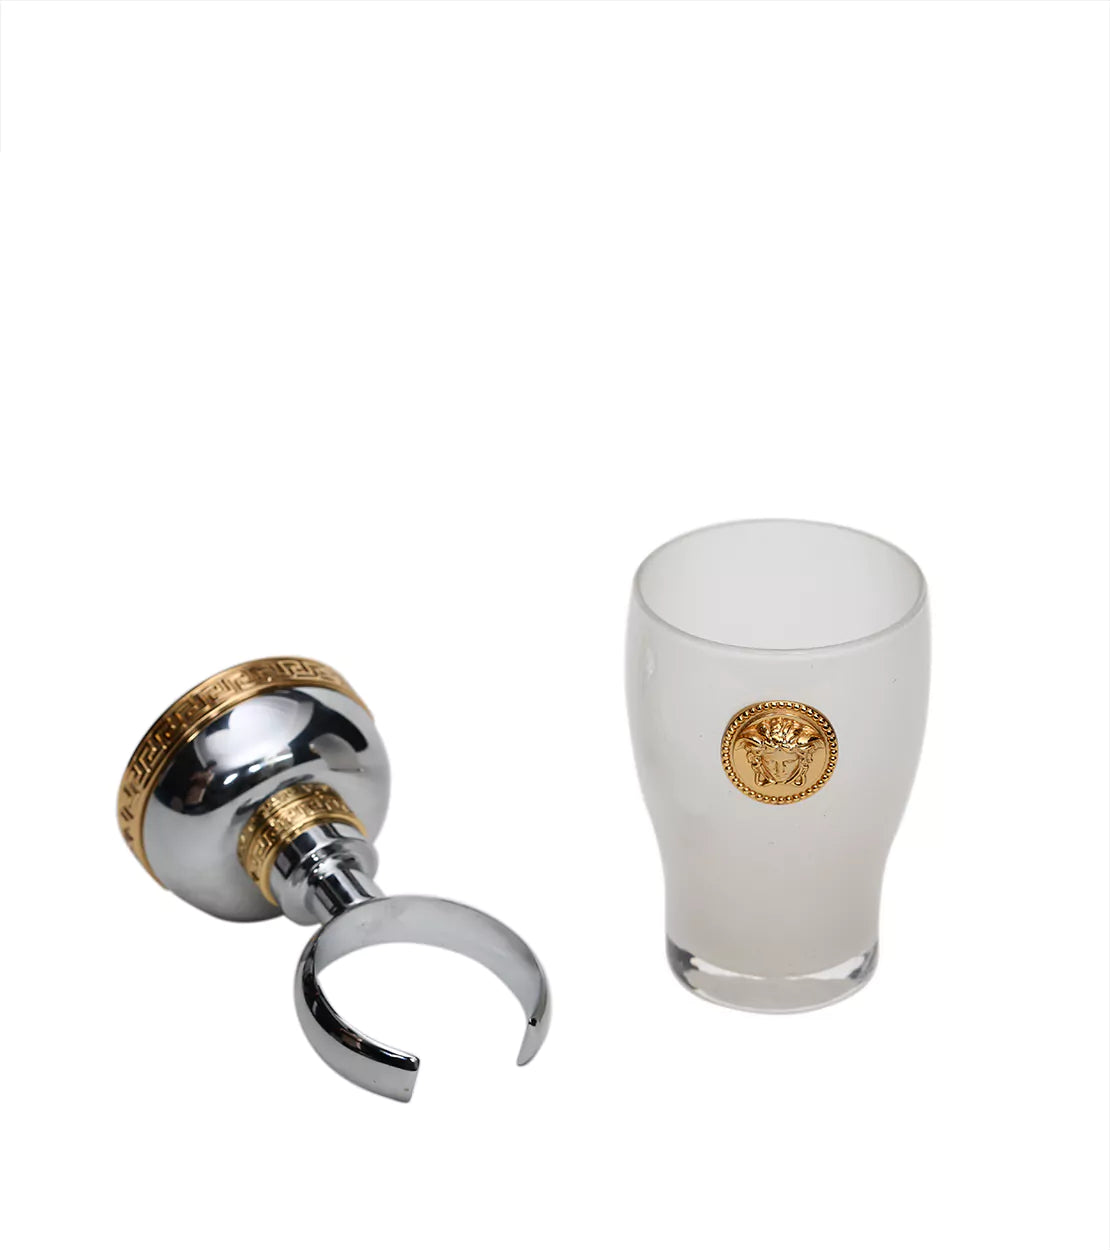 VERSACE - Opaque Toothbrush Holder with Stand - The ultimate toothbrush holder for a neat and stylish bathroom.